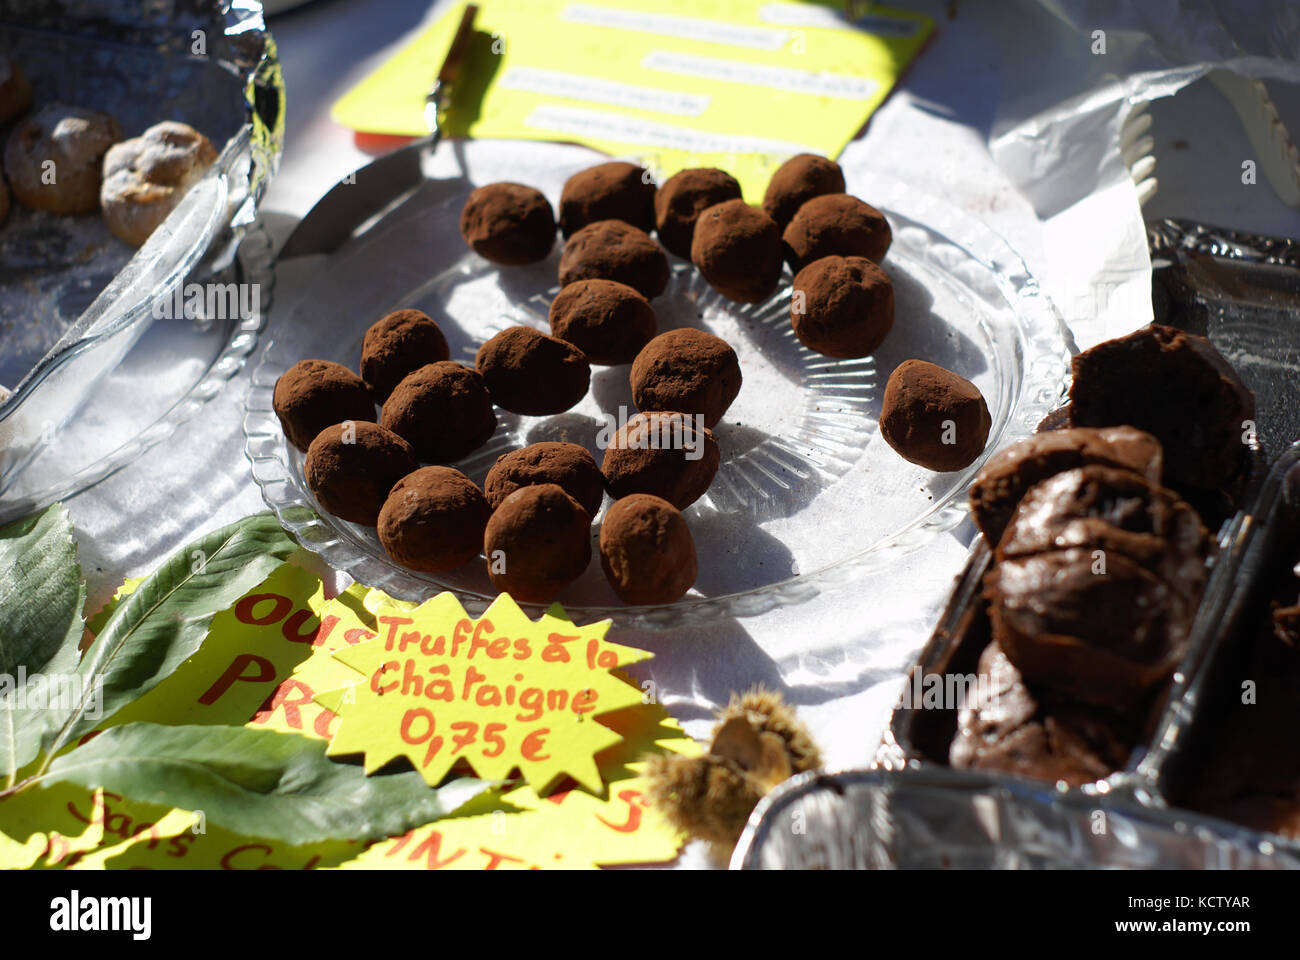 Truffles chocolate-chesnut sold during the chesnut festival in a village market in french riviera. Stock Photo